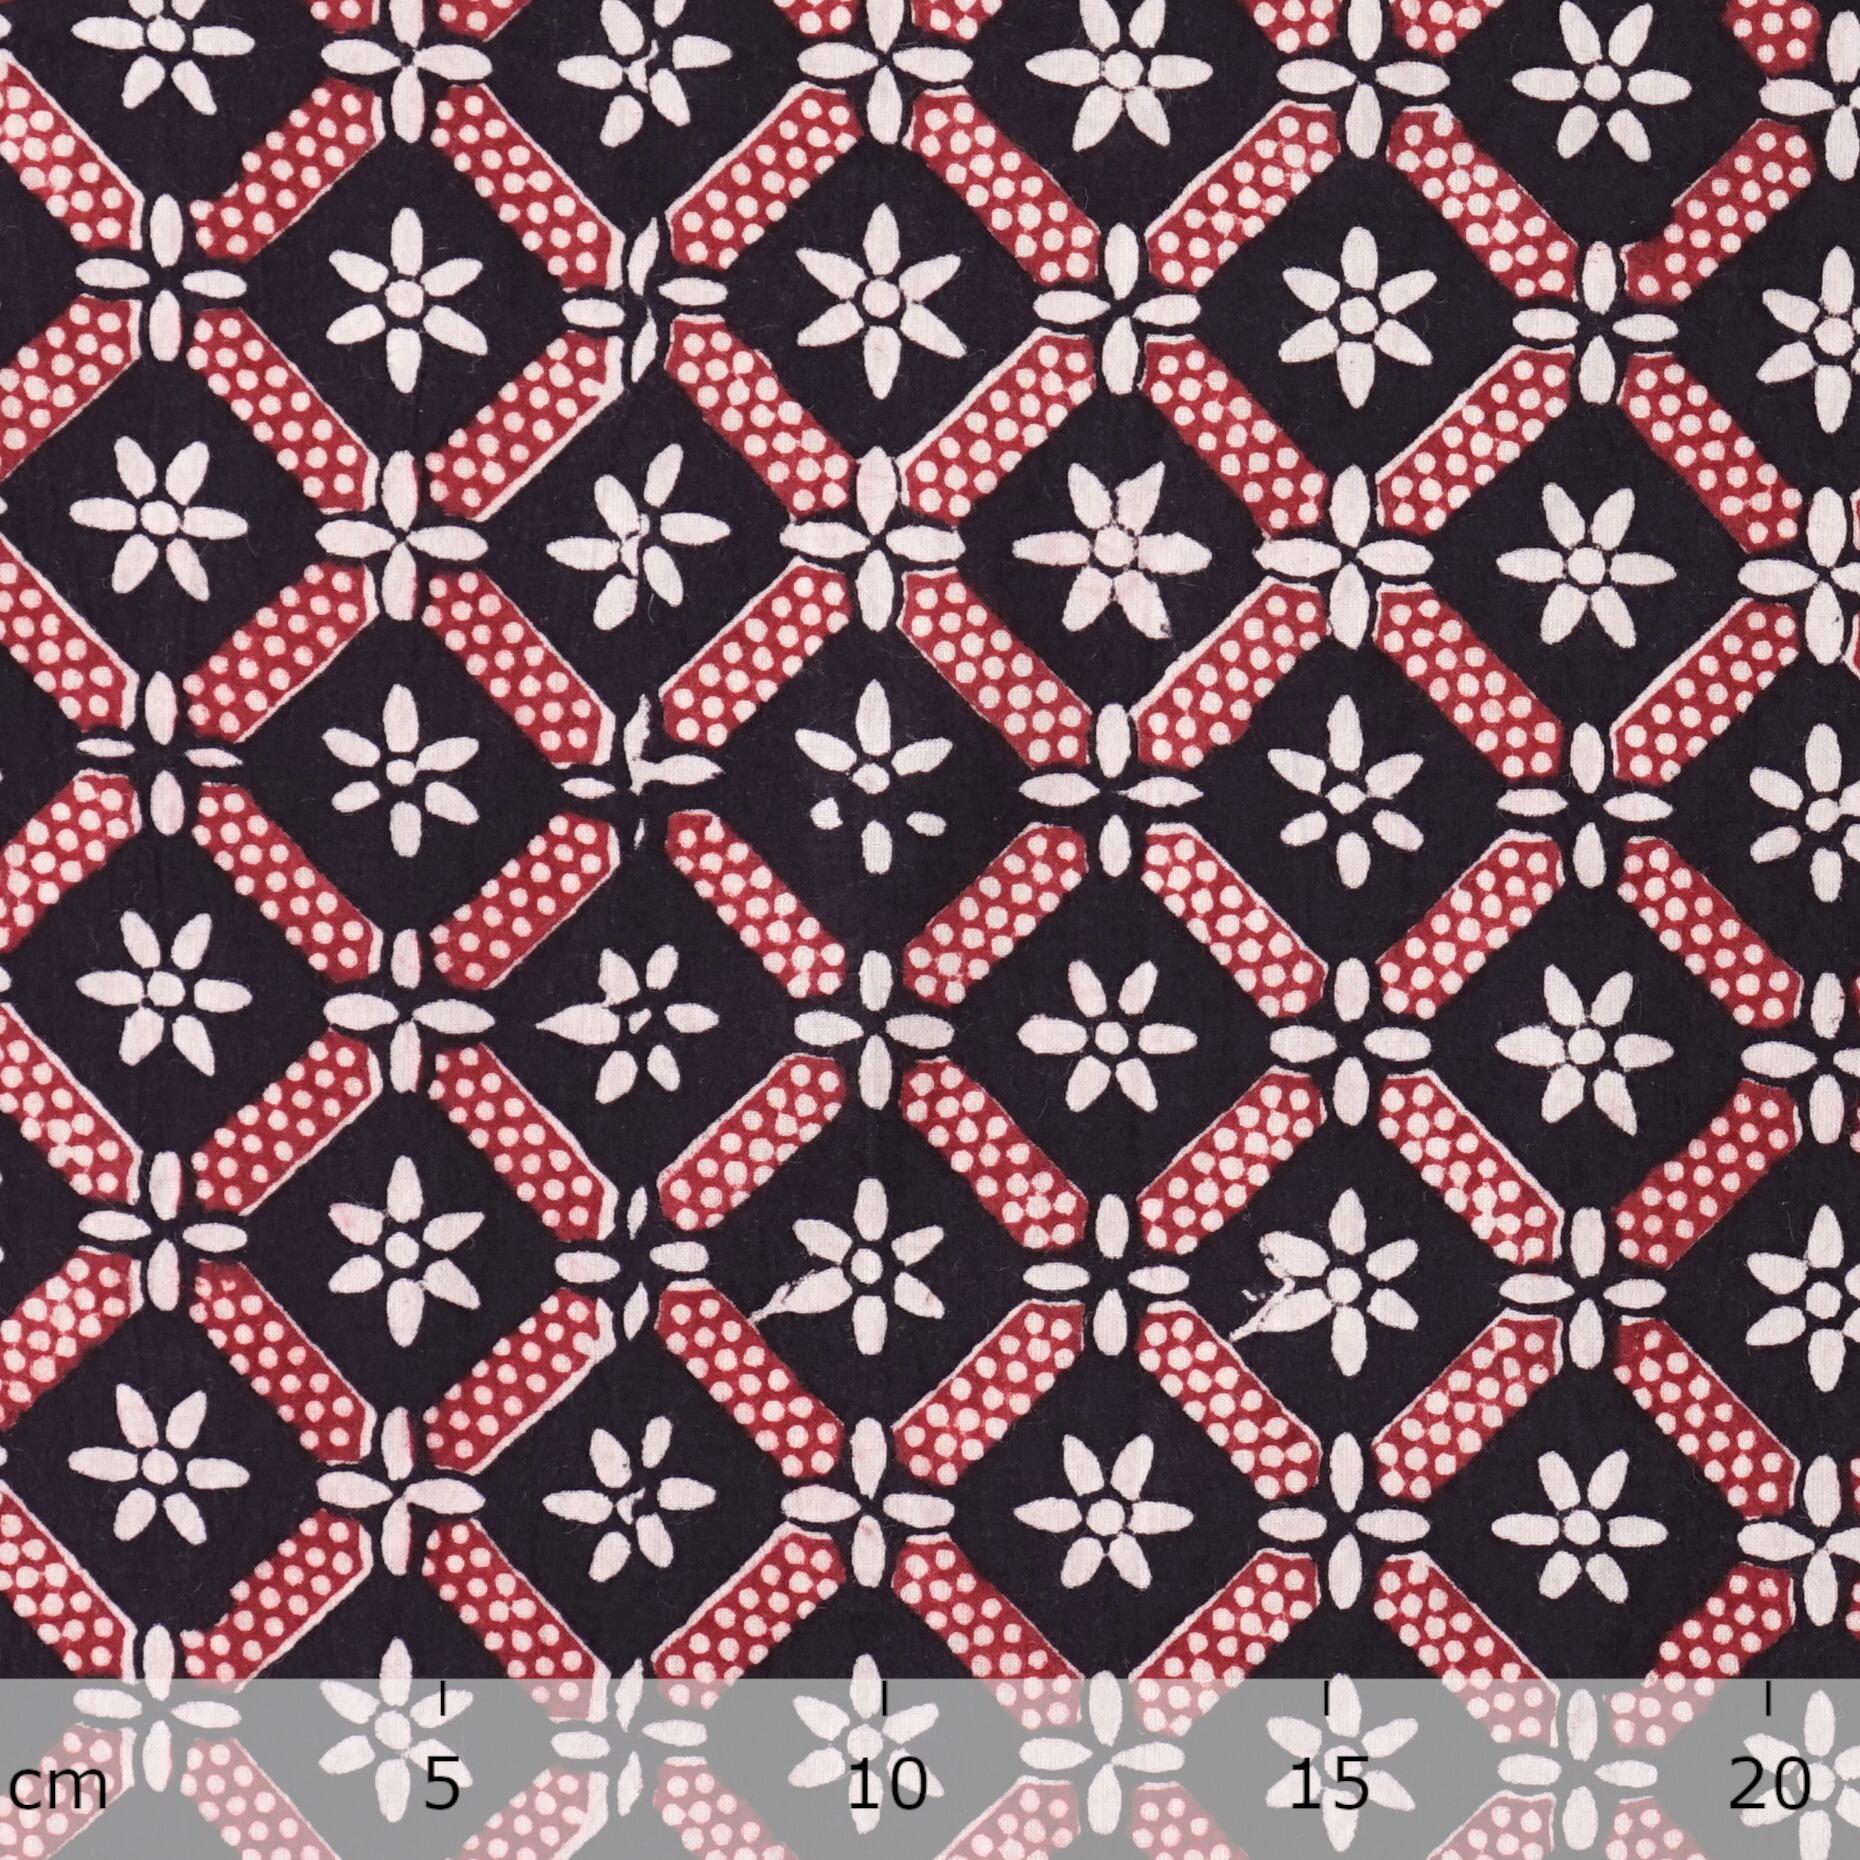 100% Block -Printed Cotton Fabric From India - Barley Design - Iron Rust Black & Alizarin Red Dyes - Ruler